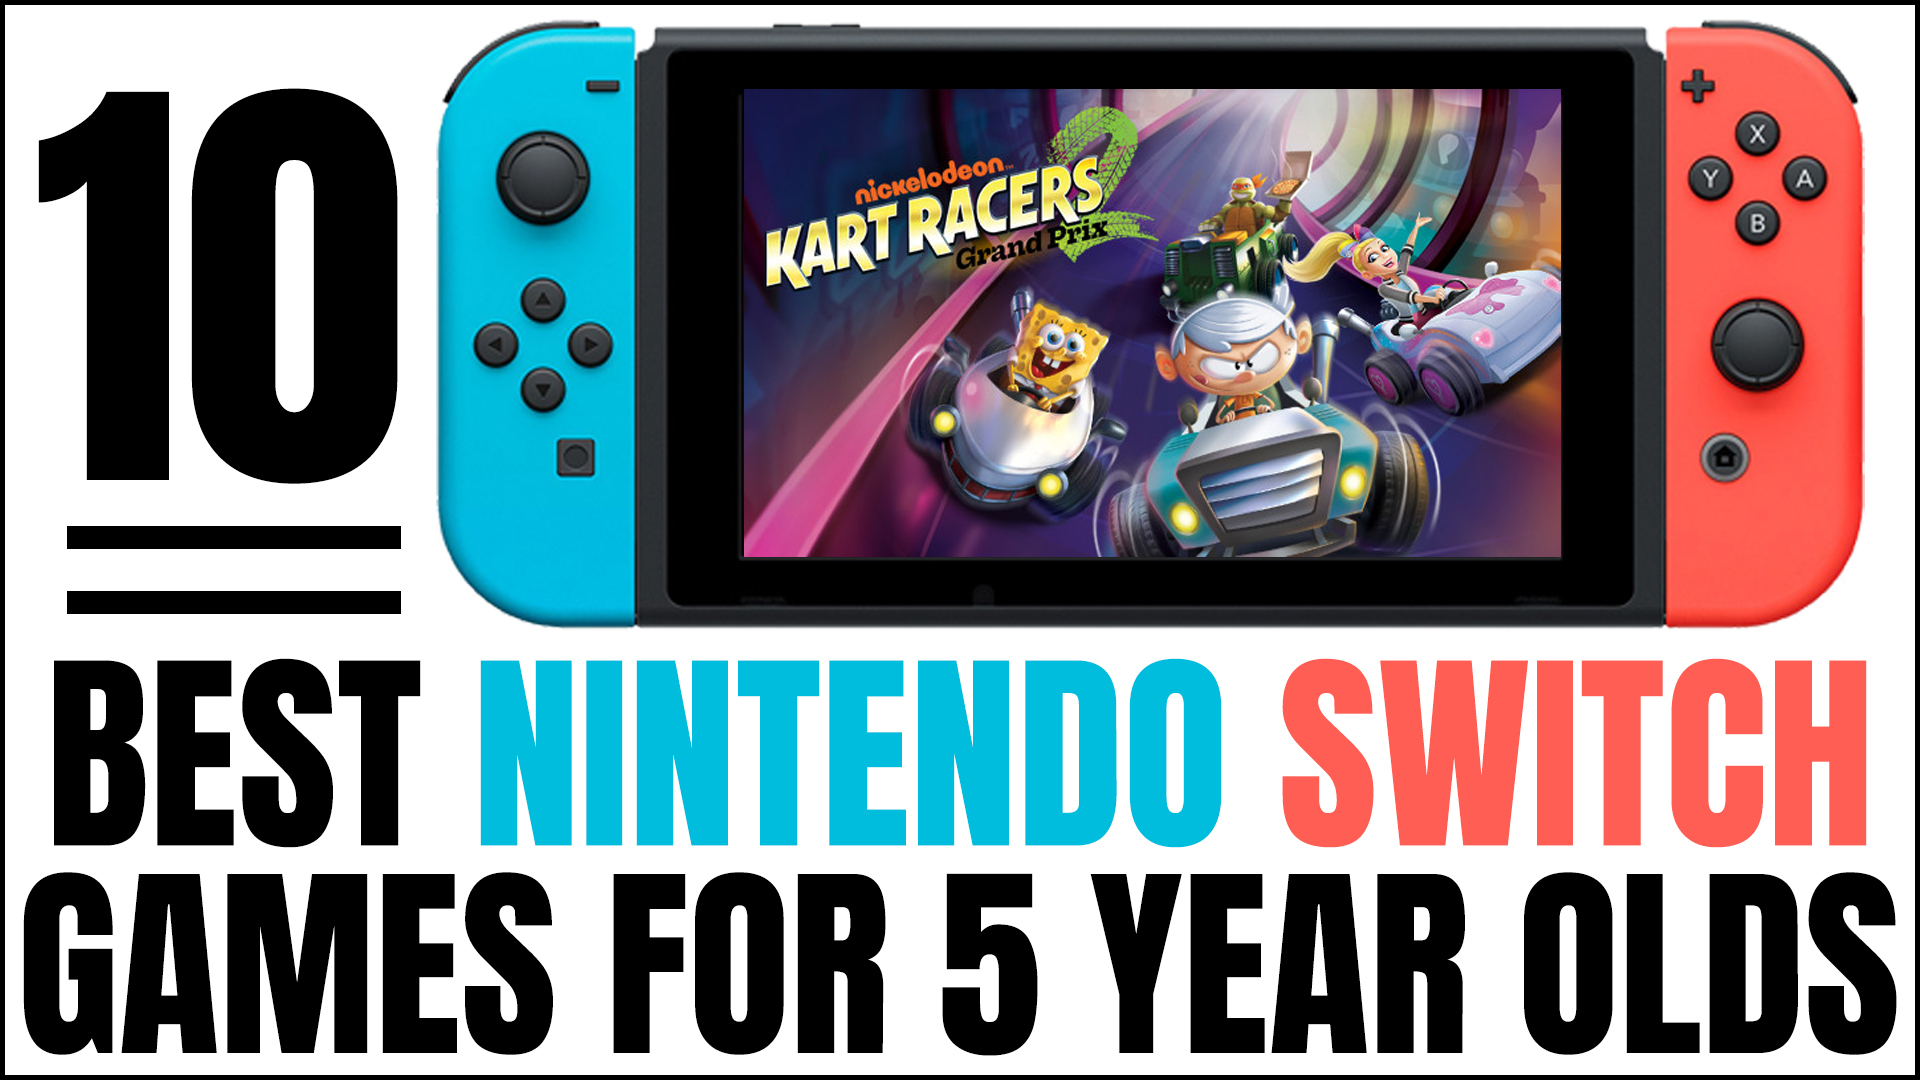 Best Nintendo Switch Games For 5 Year Olds